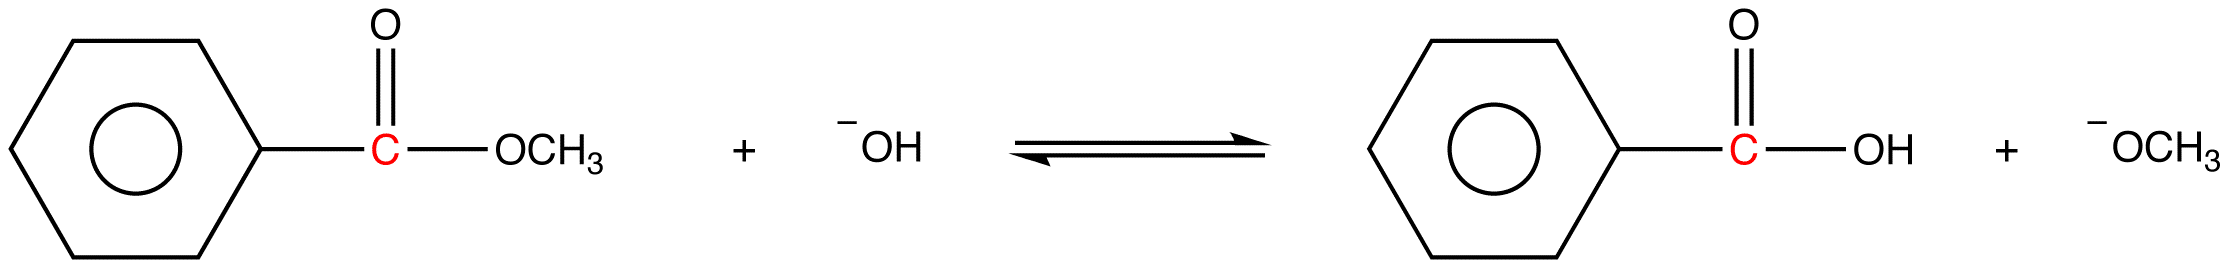 nulceophilicacylsubstitution4.png